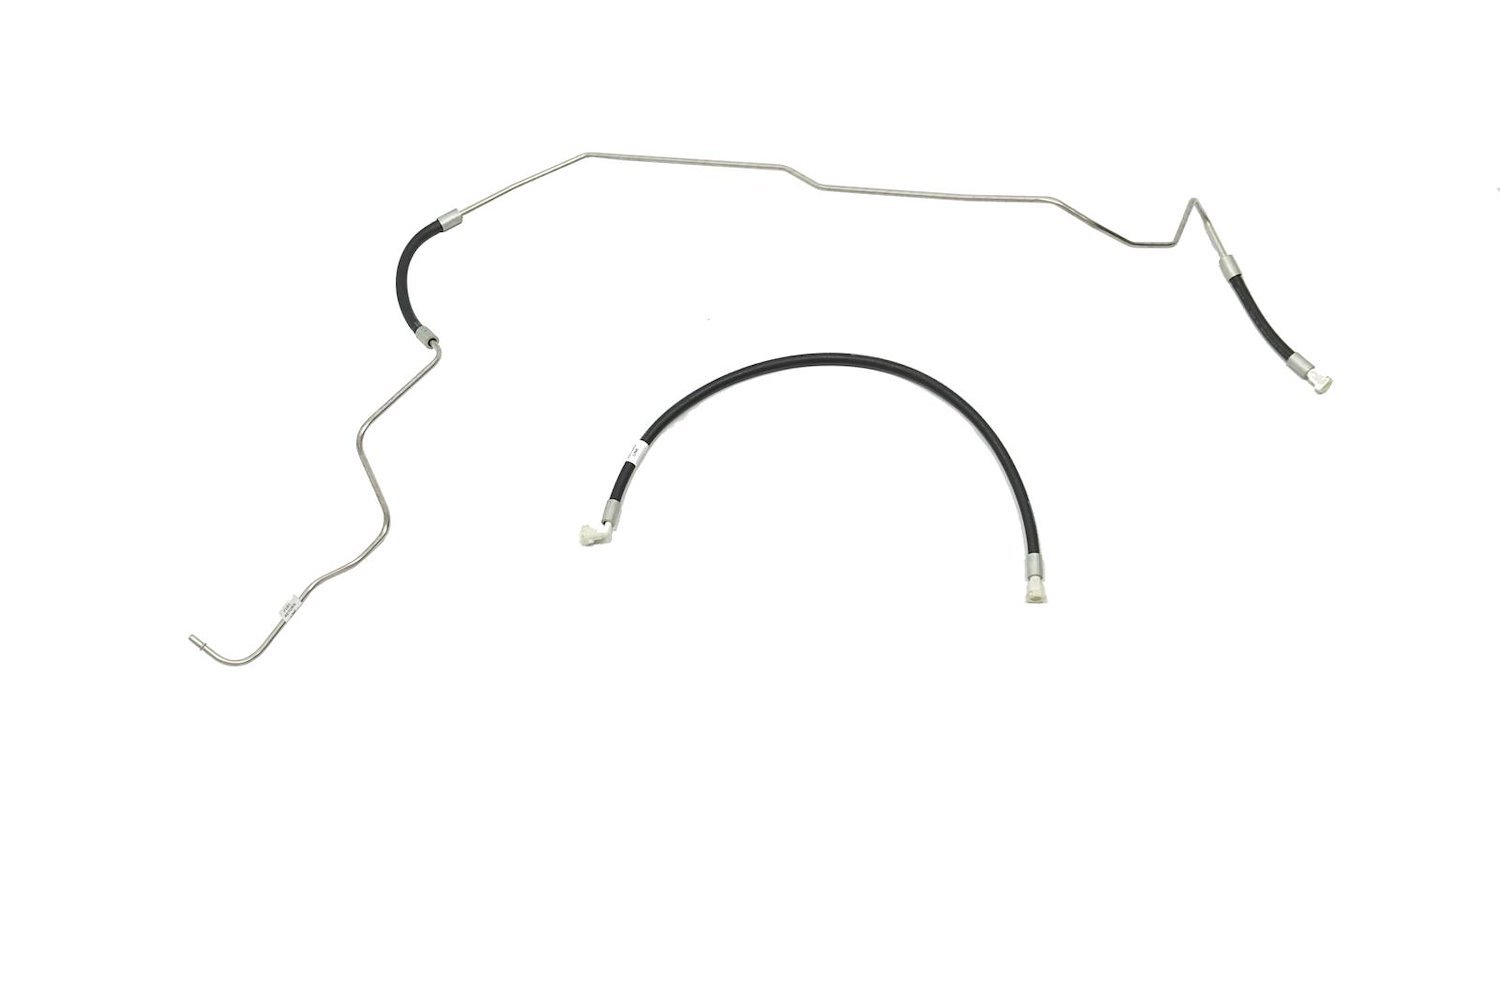 Fuel Return Line for 2003-2007 Hummer H2 [Stainless